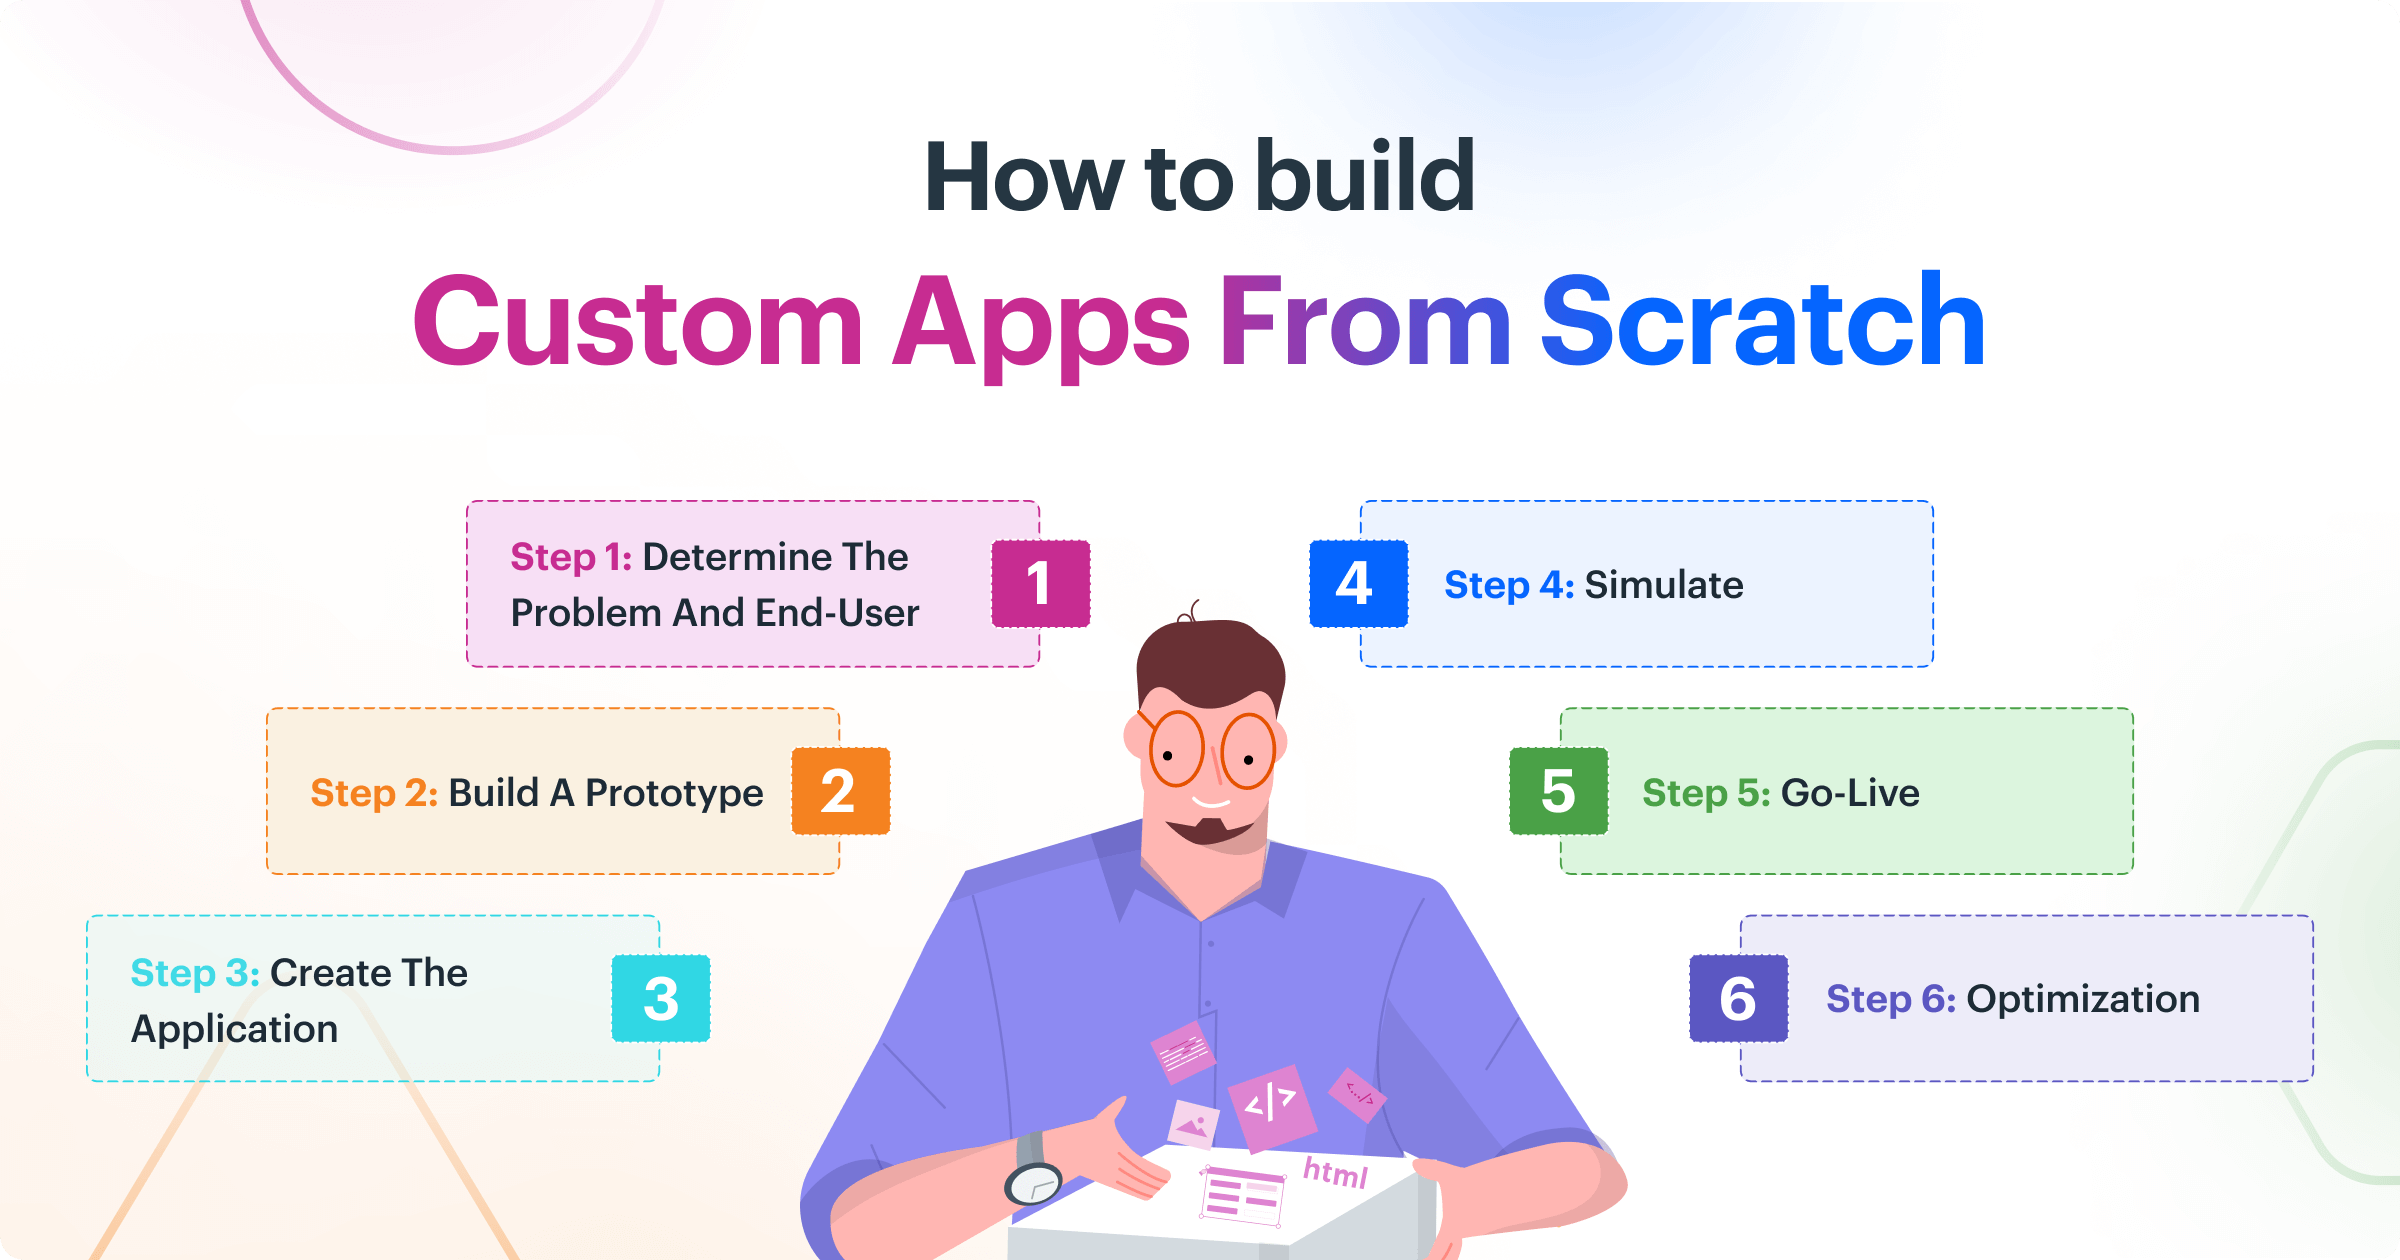 How to build custom apps from scratch